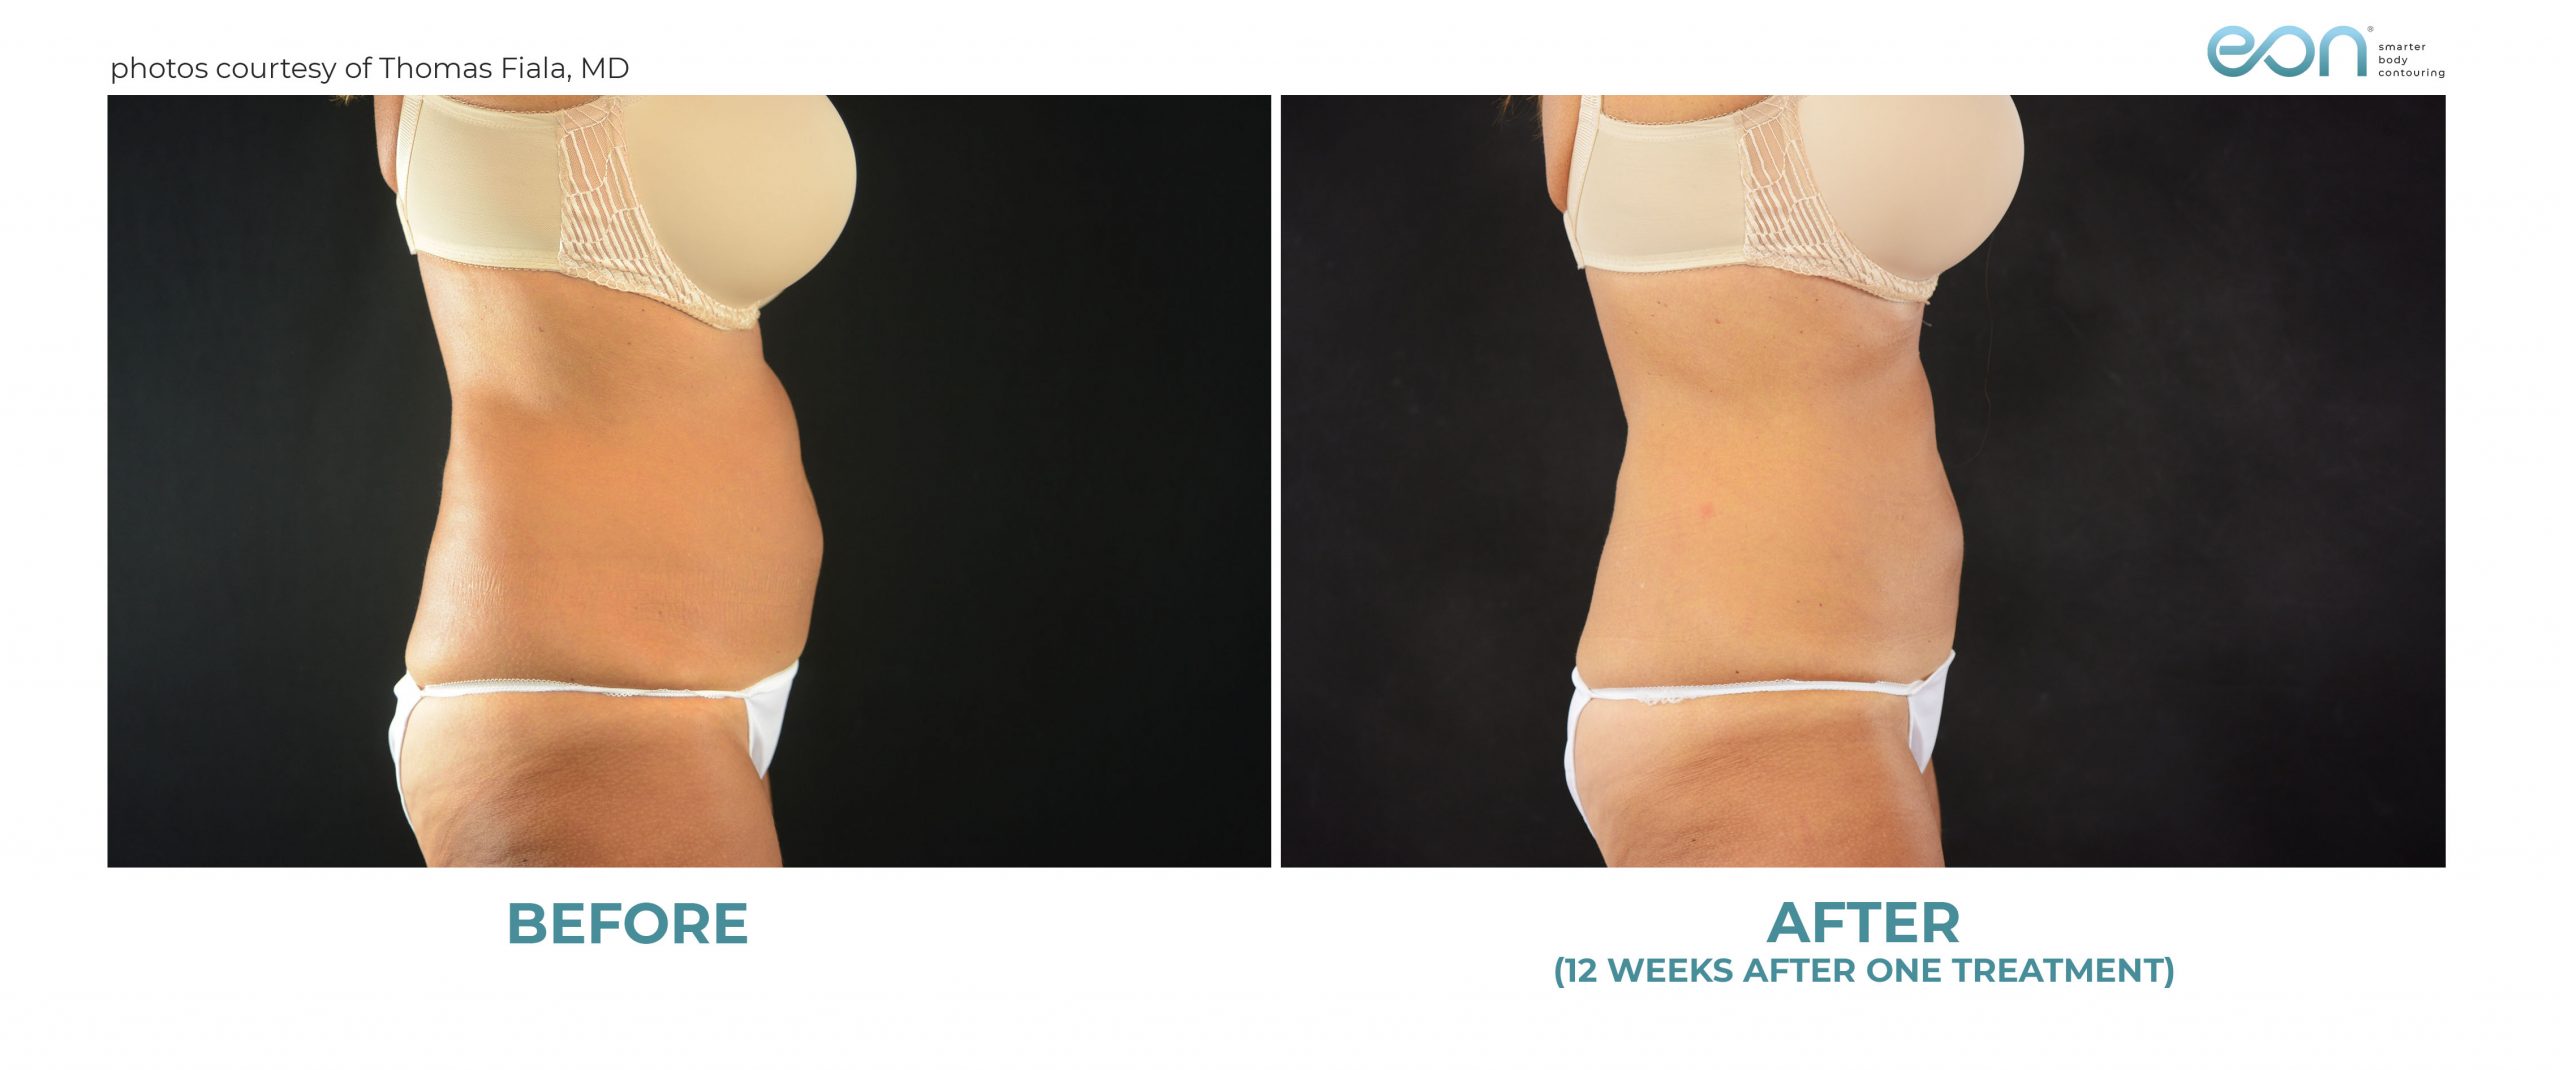 EON® Body Contouring Laser before and 12 weeks after one treatment